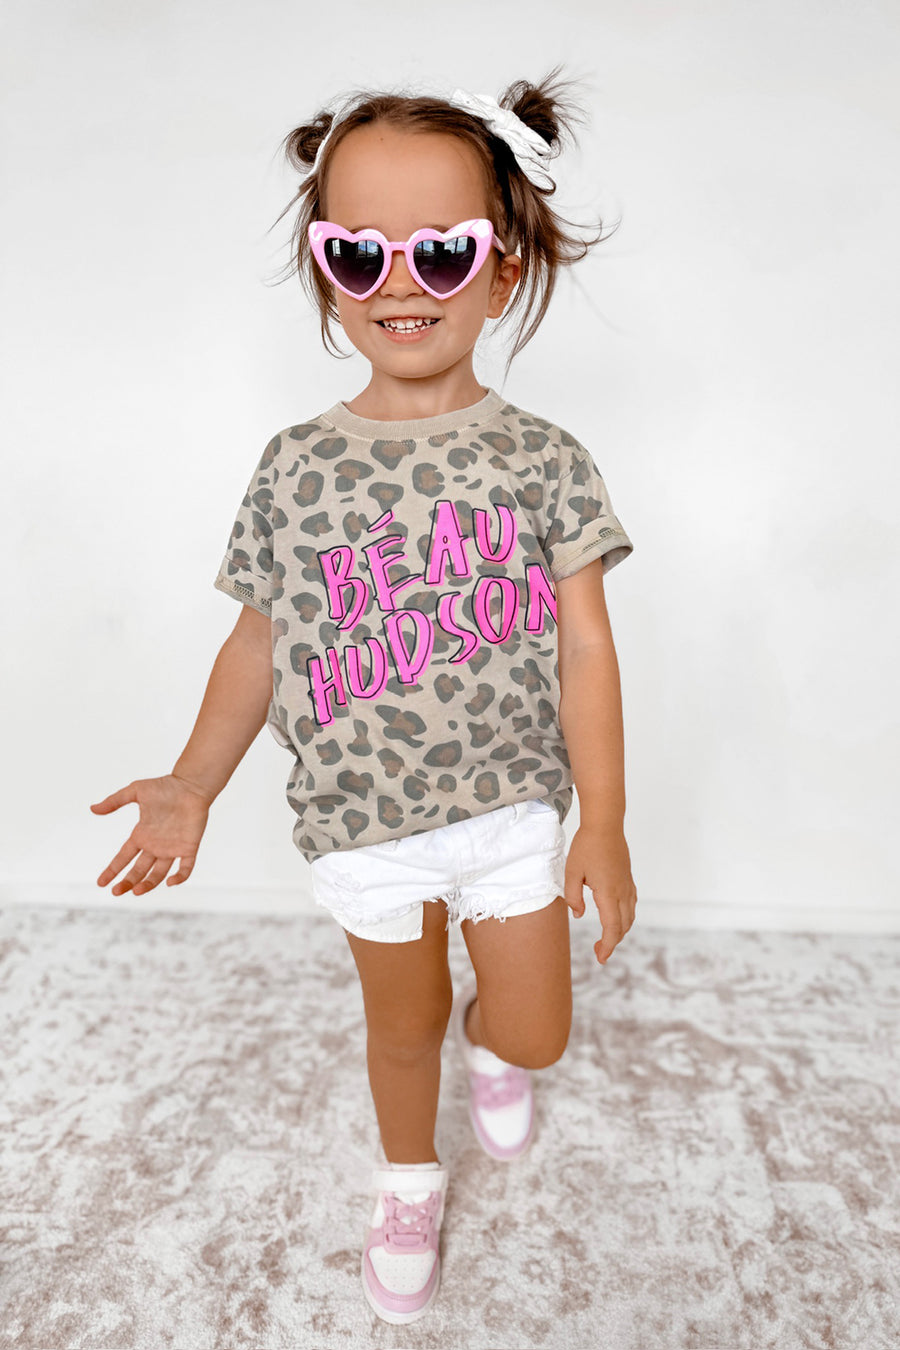 New Arrivals from Beau Hudson | Baby, Kids & Adults | Australia